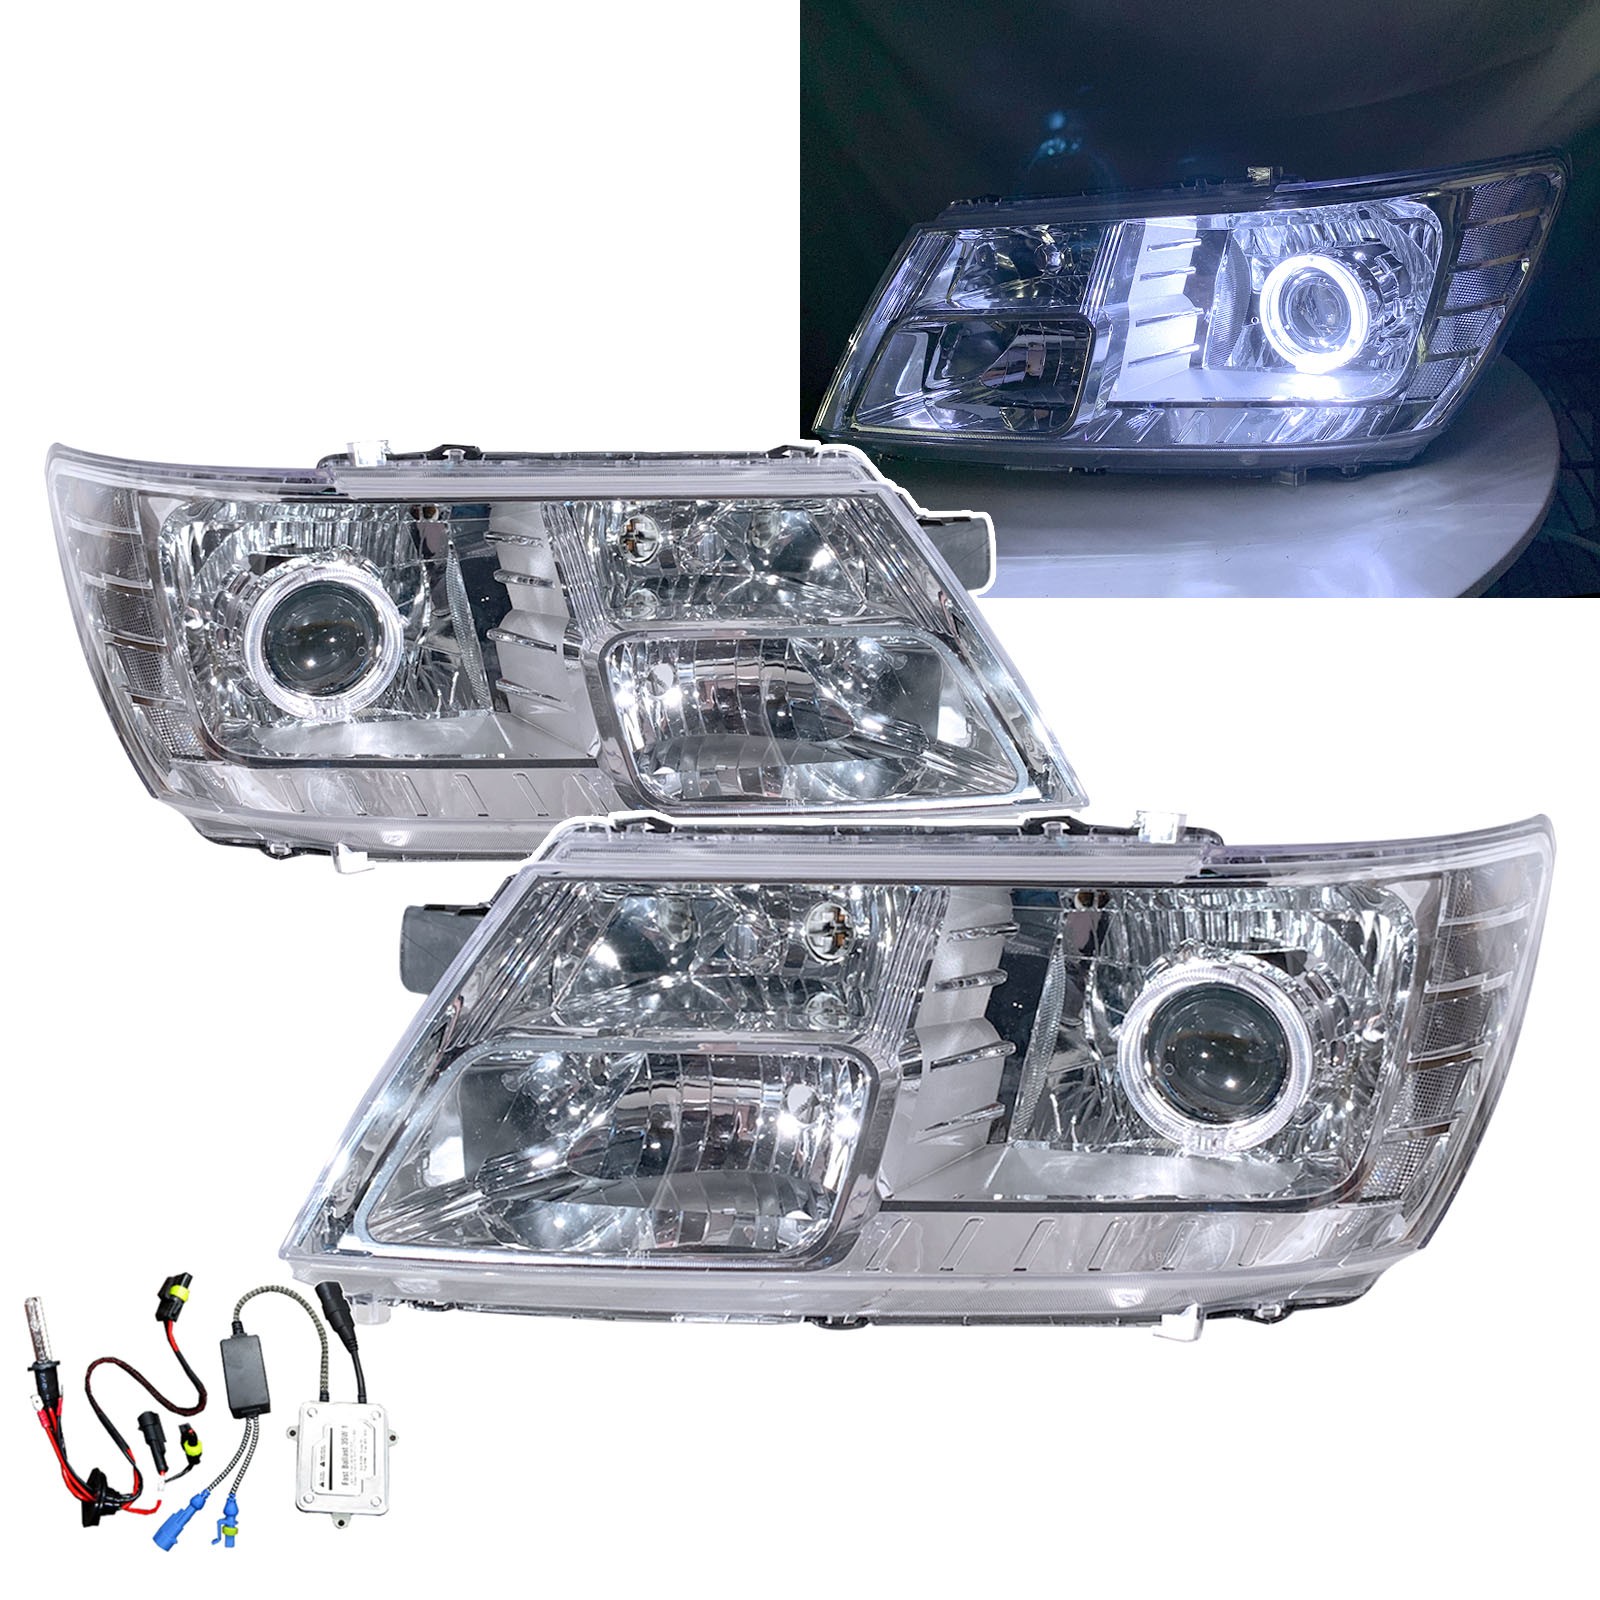 CrazyTheGod Freemont JC 2011-2015 SUV 5D Guide LED Angel-Eye Projector HID Headlight Headlamp Chrome for Fiat LHD